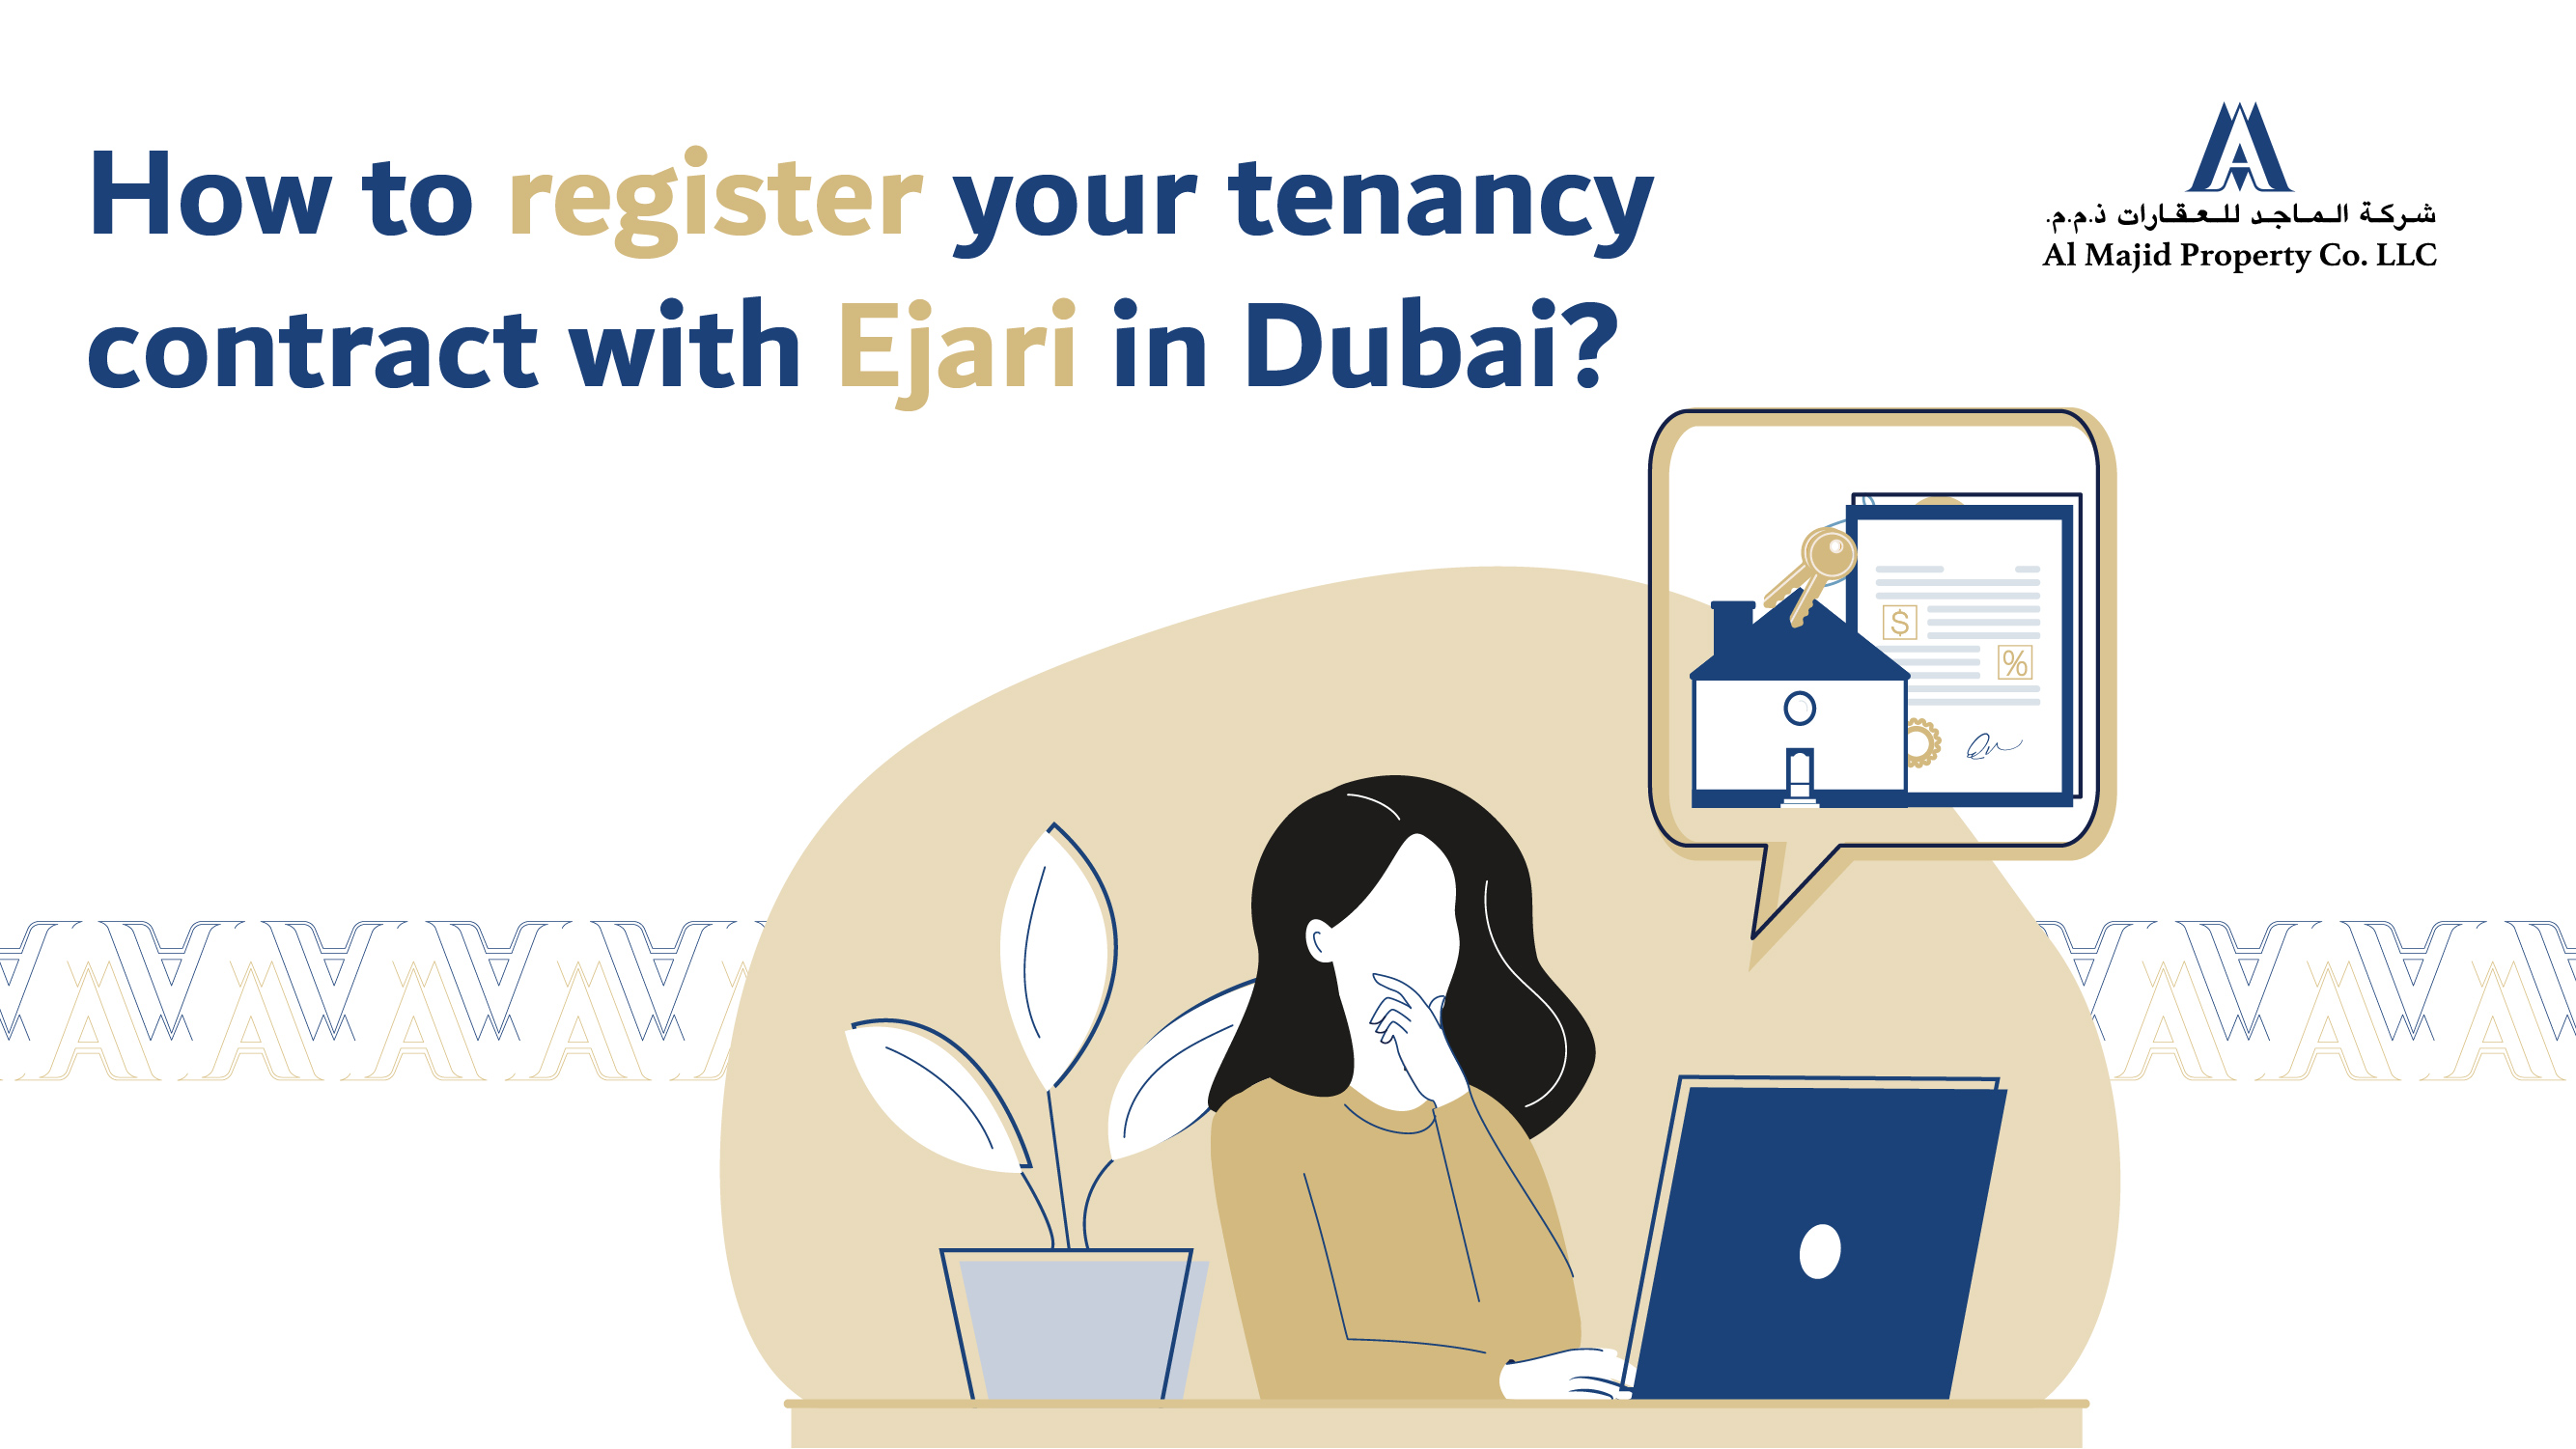 How to Register Your Tenancy Contract With Ejari in Dubai